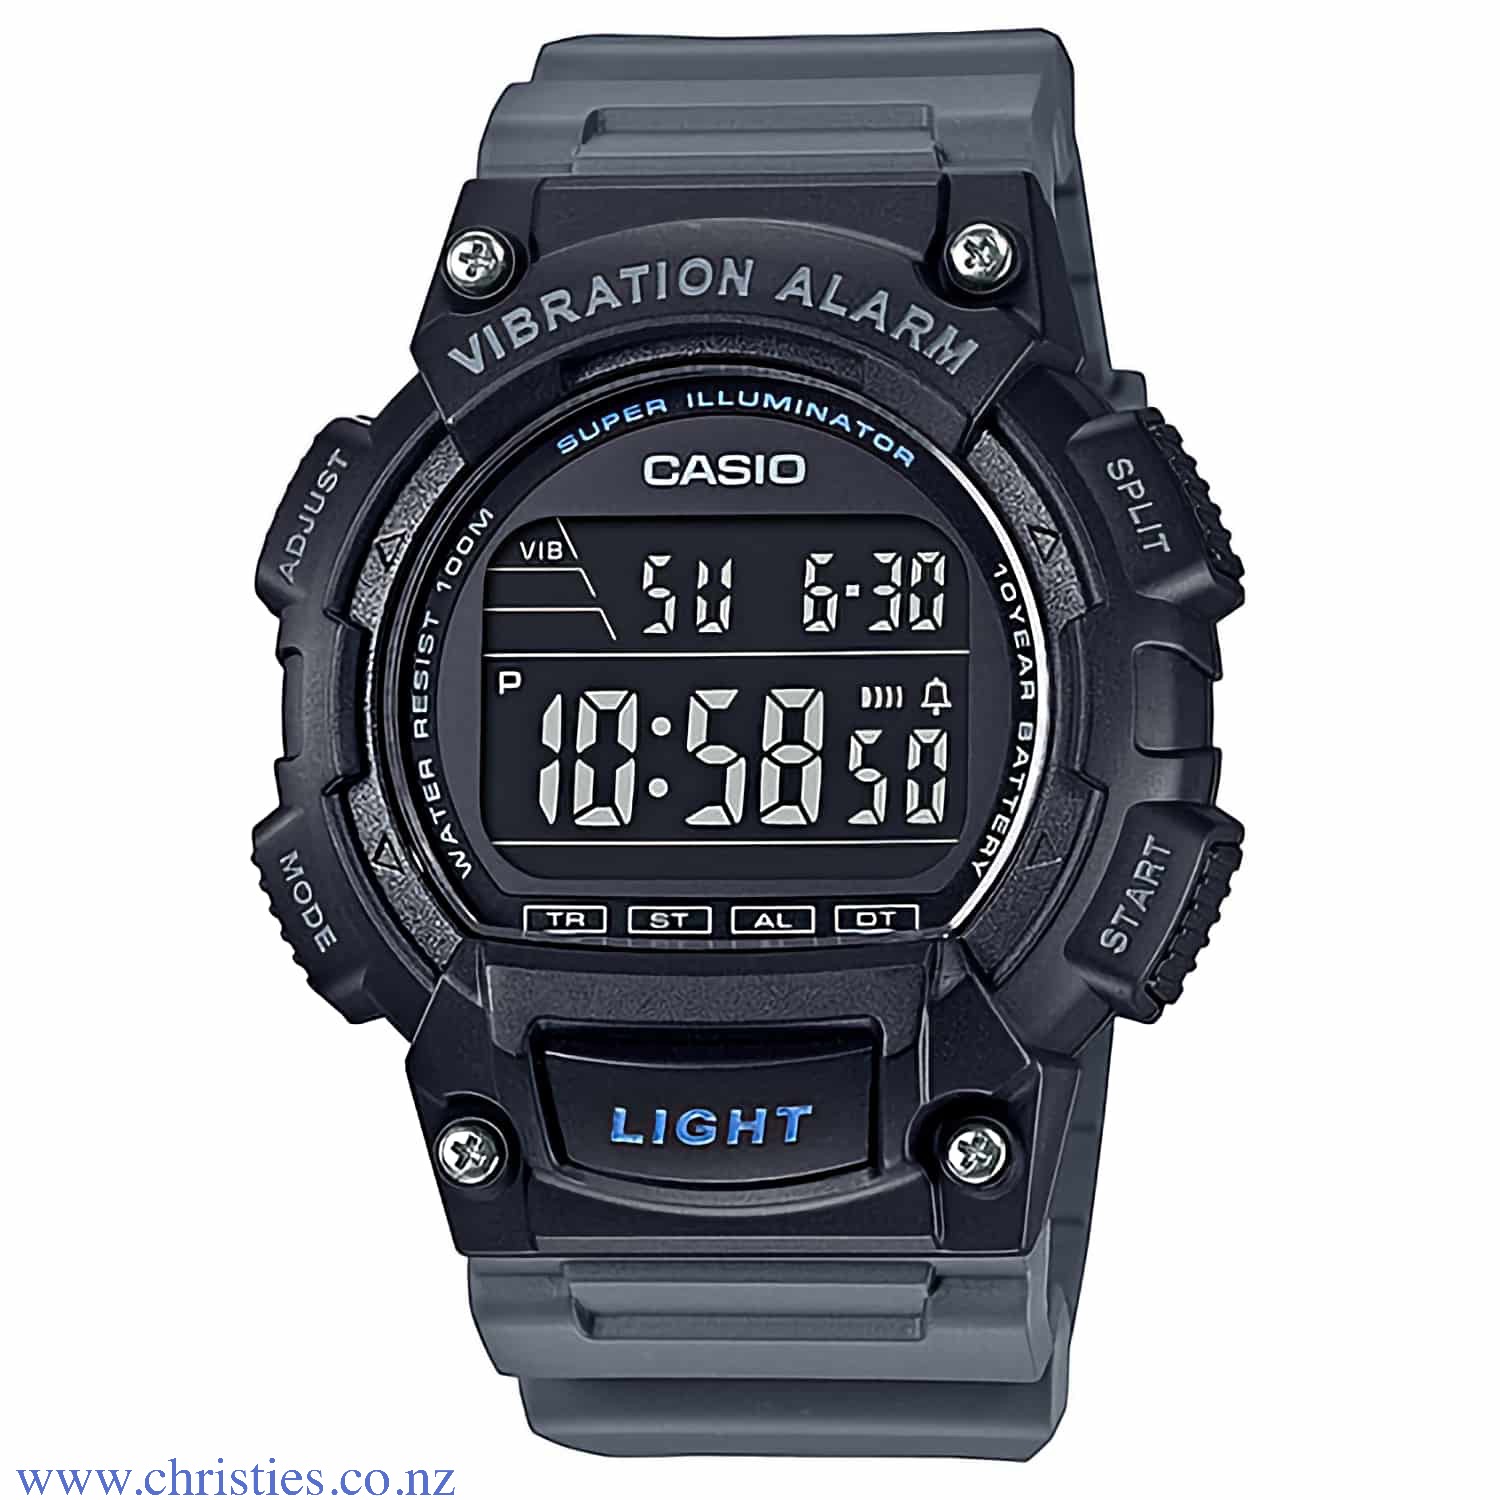 W736H-8BV Casio Digital Alarm Chronograph Watch. Introducing a new colour for the multi-functional and sporty W-736H lineup. A light-on-dark LCD is both cool and fashionable. 10-year battery life virtually eliminates the need to worry about battery replac